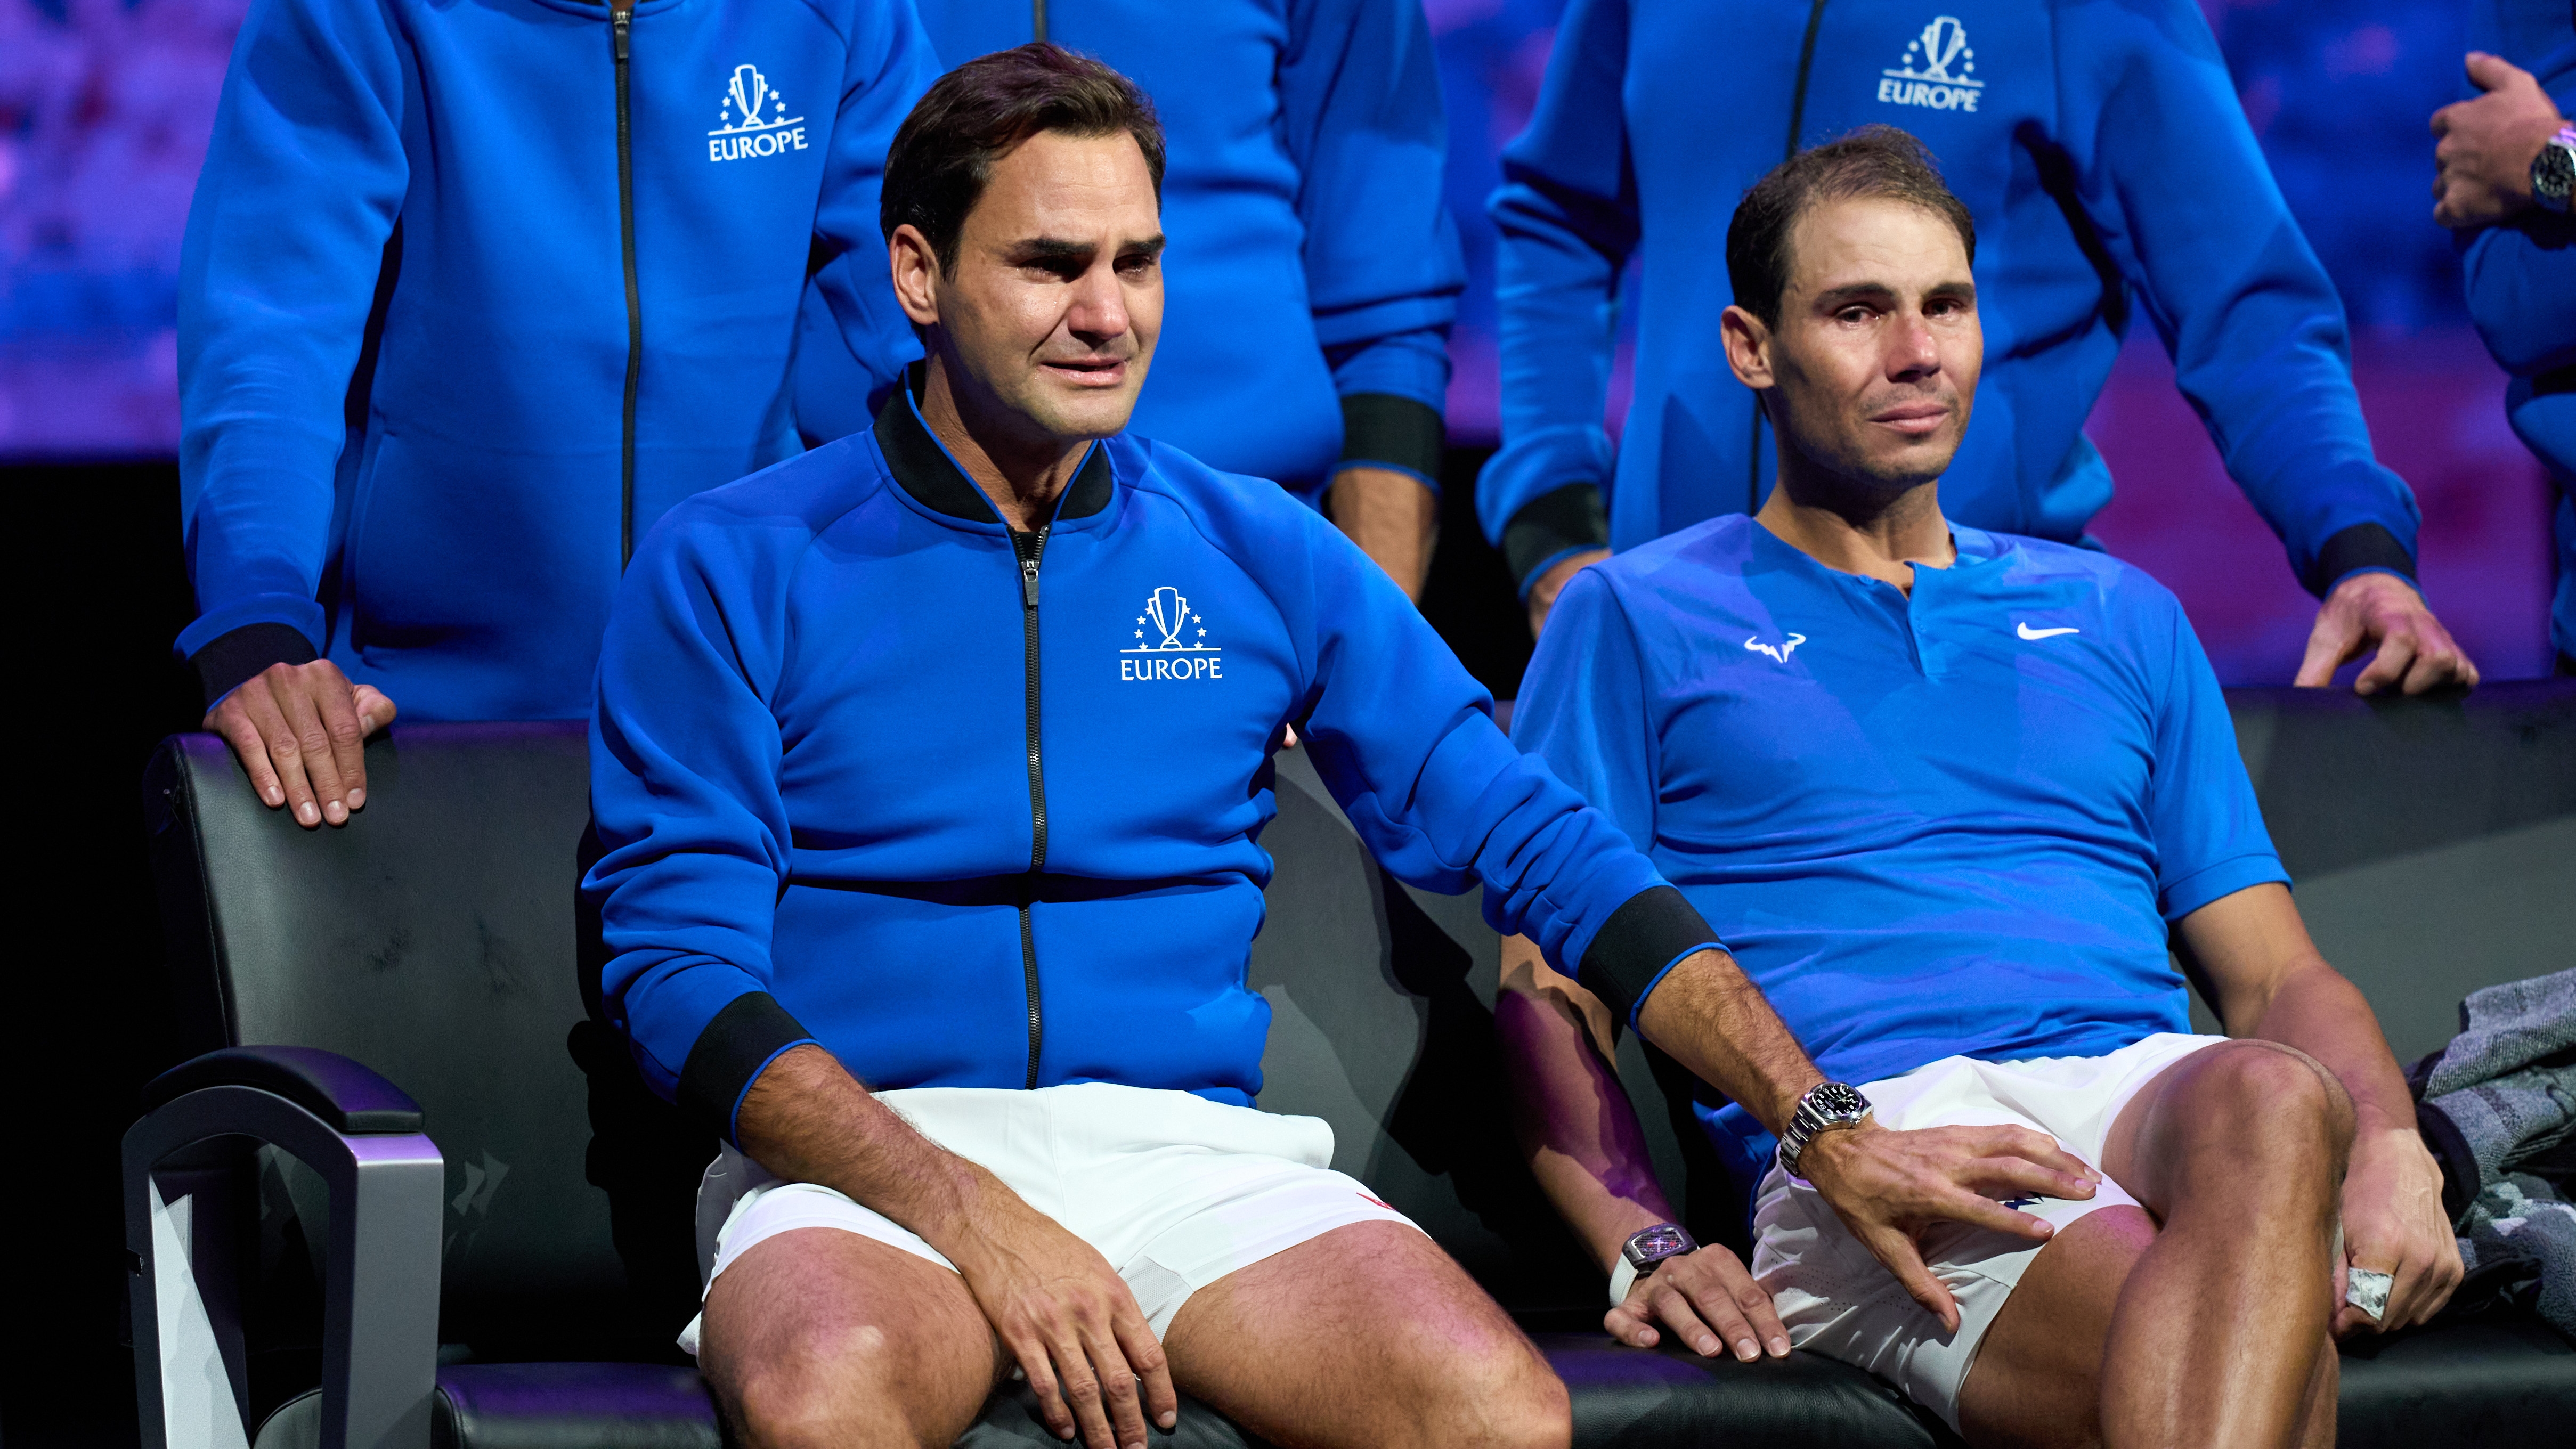 Sep 23, 2022; London, United Kingdom; A tearful Roger Federer (SUI) and Rafael Nadal (ESP) look on after his last  Laver Cup Tennis match. Mandatory Credit: Peter van den Berg-USA TODAY Sports/Sipa USA